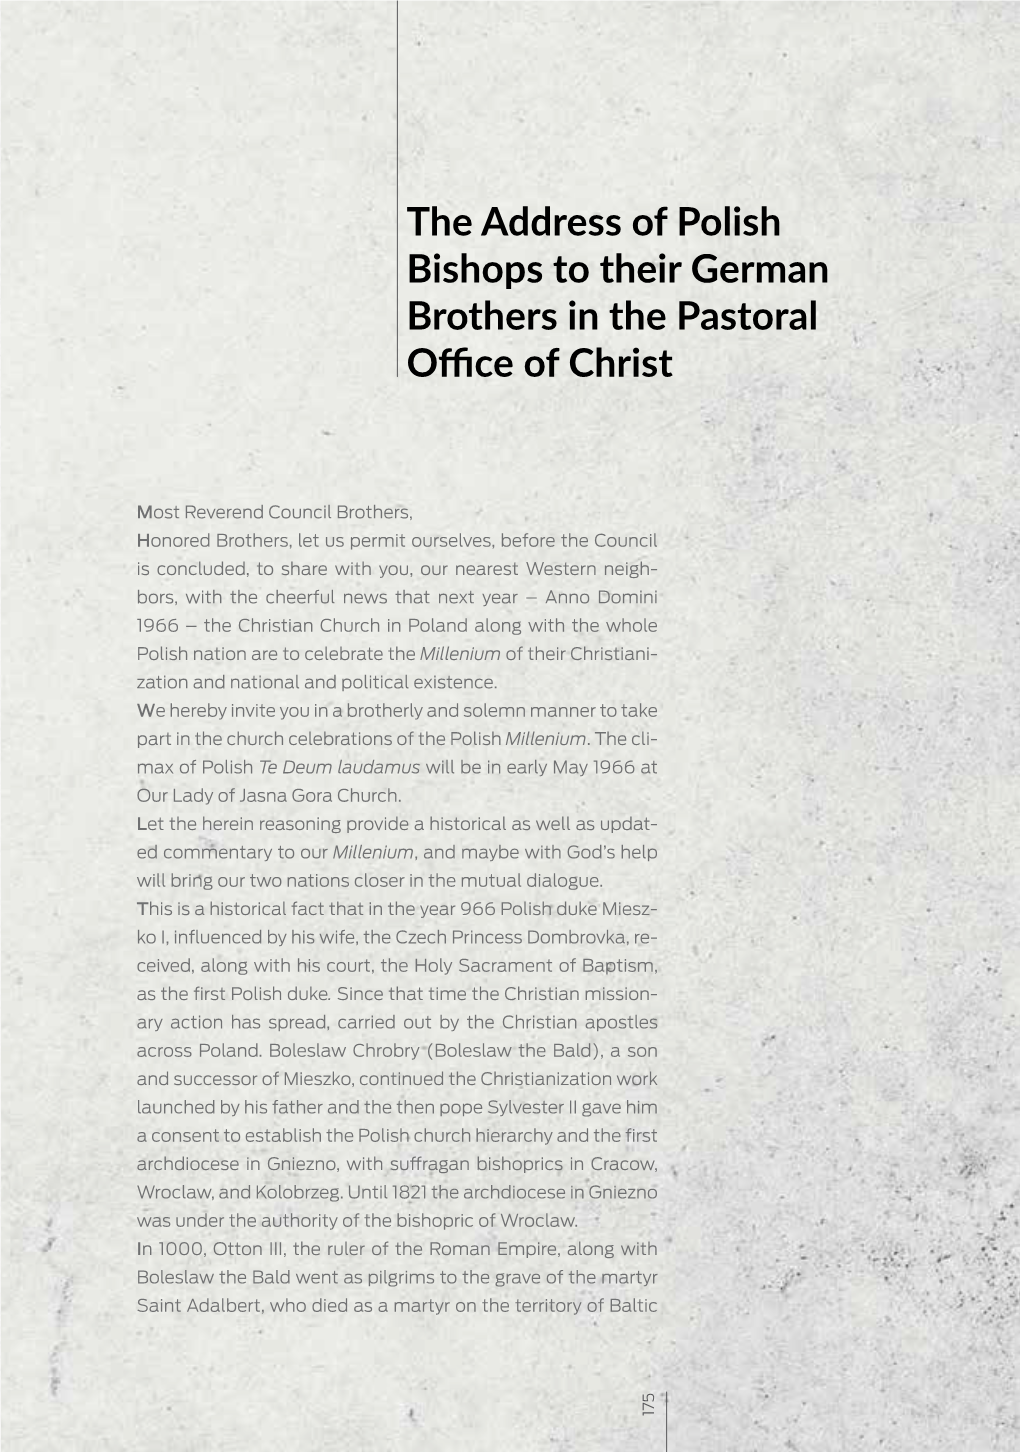 The Address of Polish Bishops to Their German Brothers in the Pastoral Office of Christ